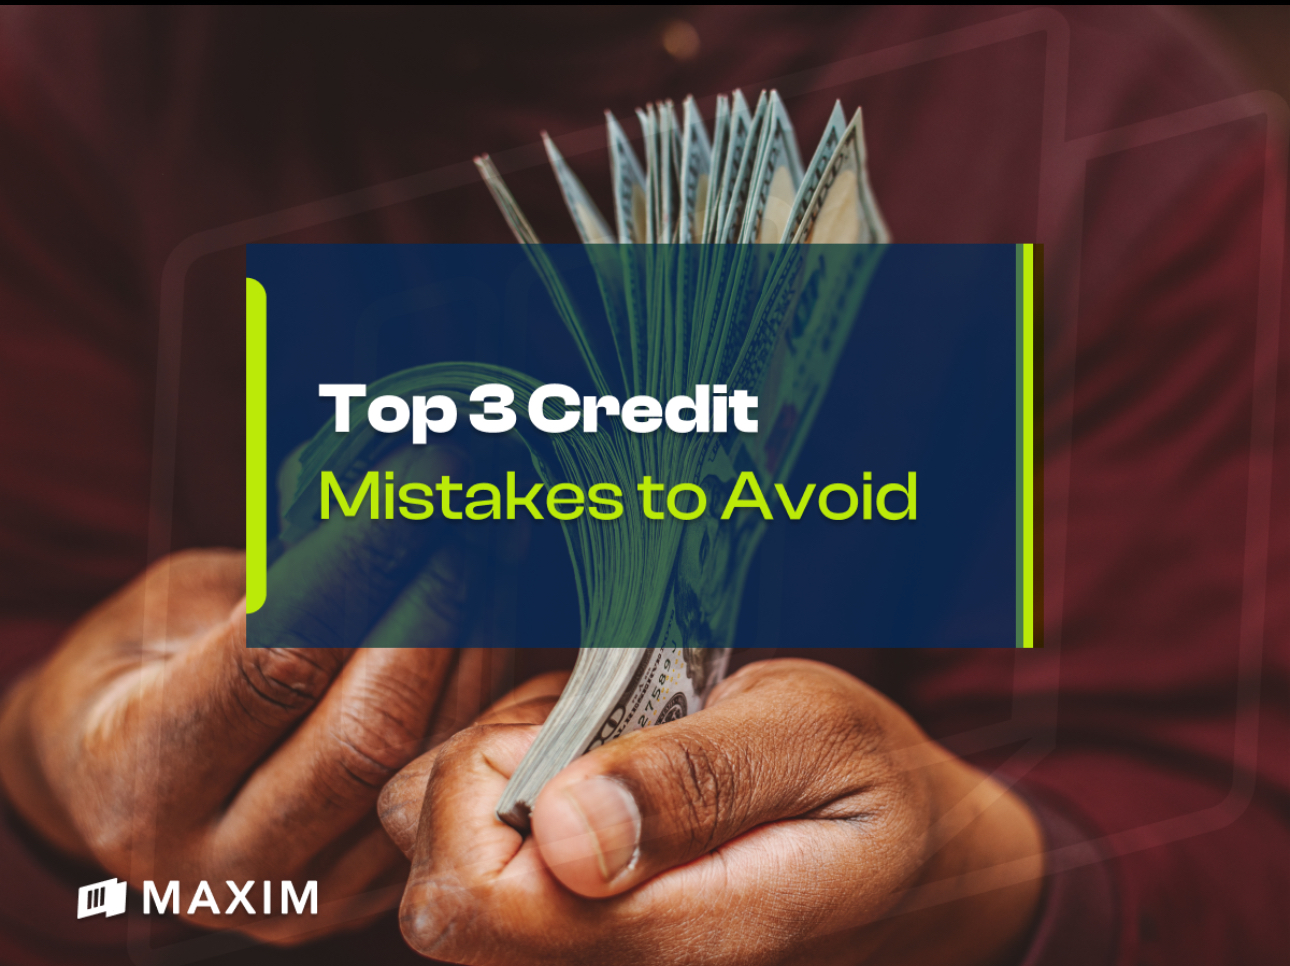 Top 3 Credit Mistakes to Avoid